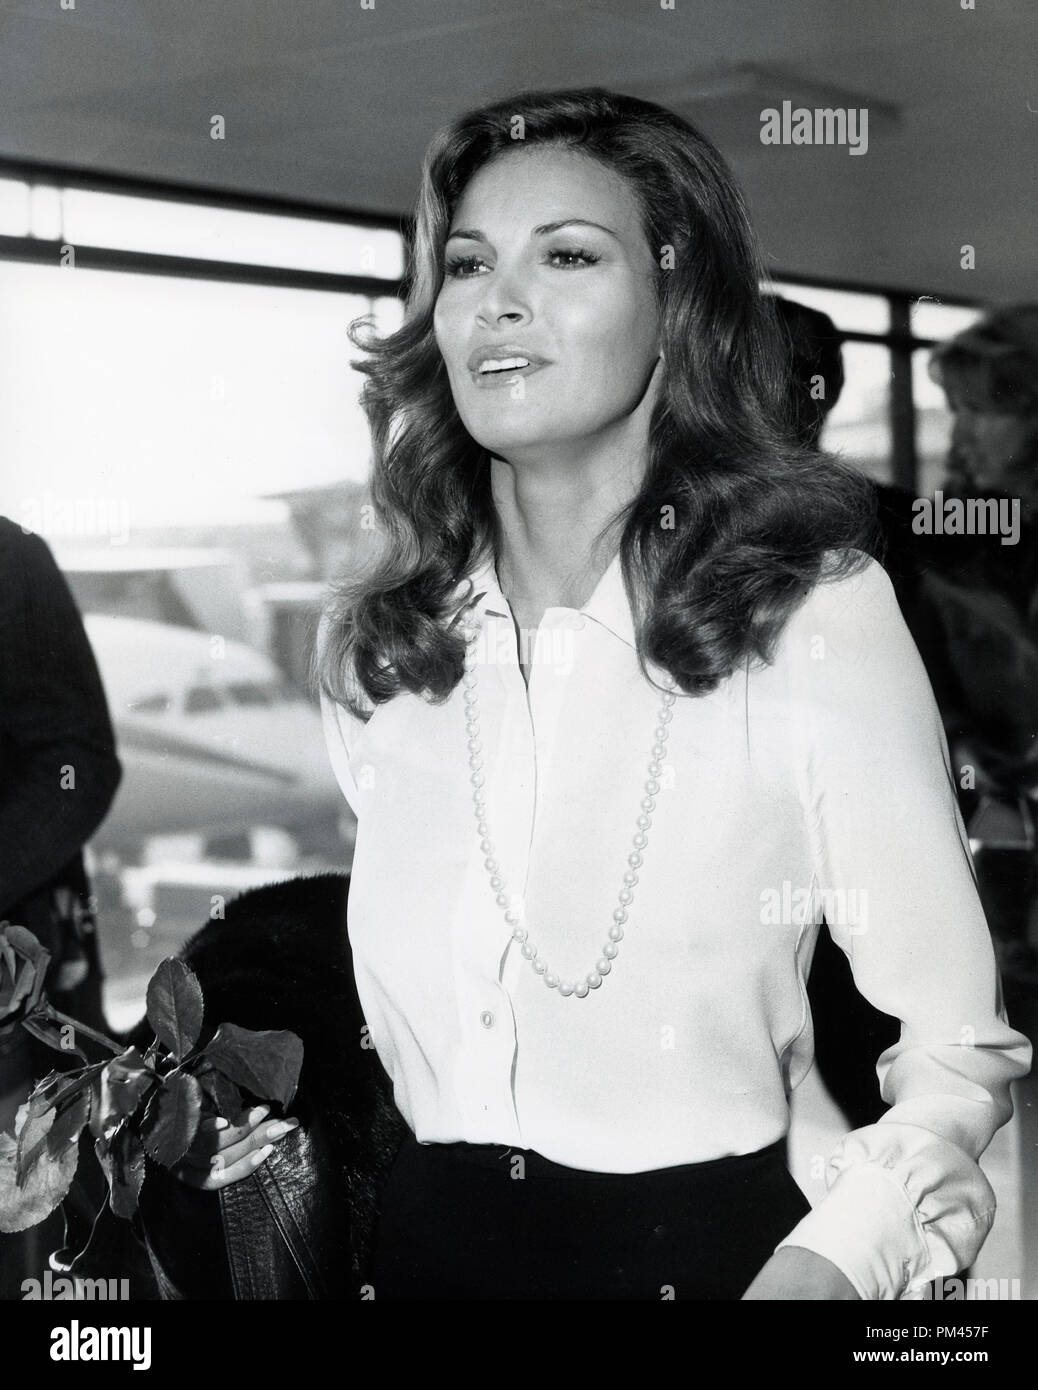 Raquel Welch on her way to promote her film, Kansas City Bomber' November 9,1972. File Reference #1032 016THA © JRC /The Hollywood Archive - All Rights Reserved. Stock Photo